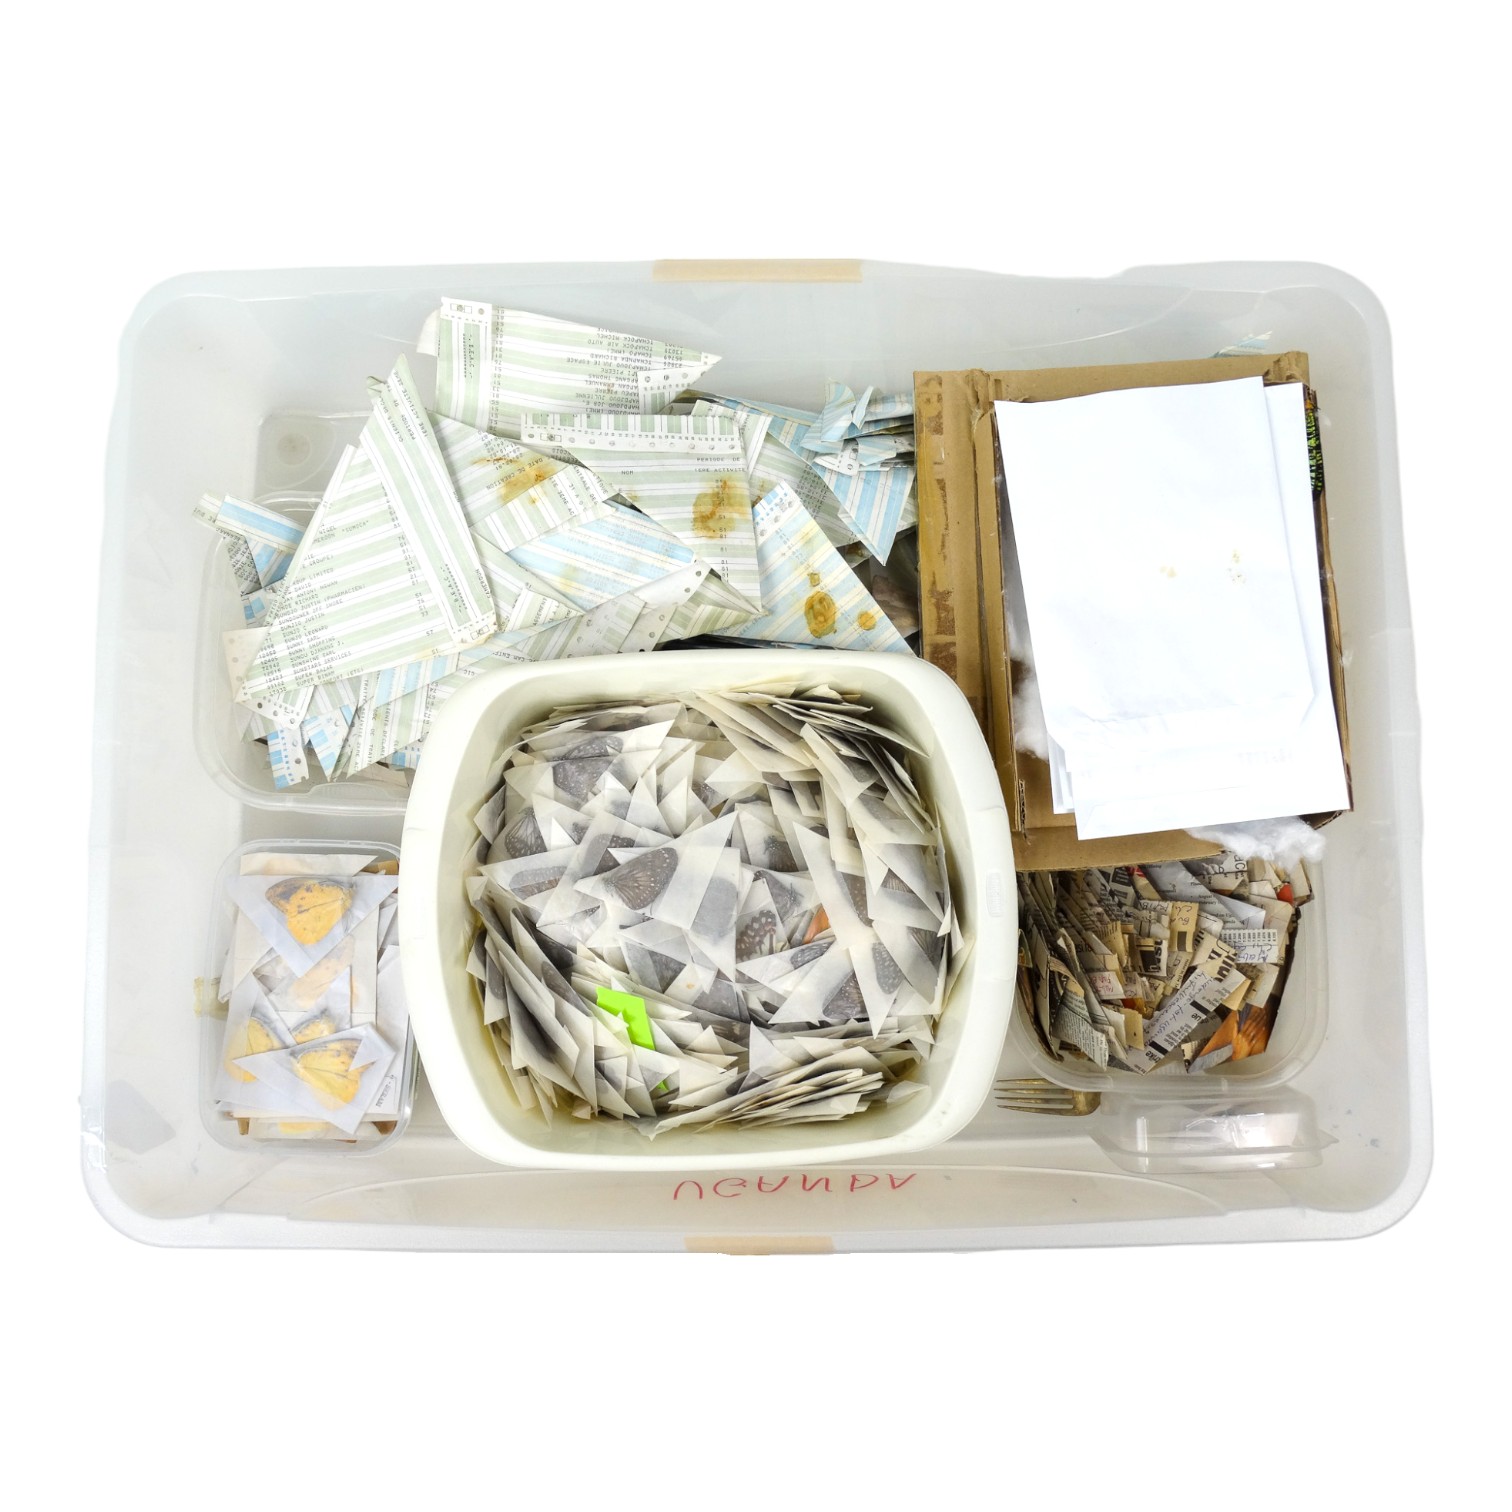 A box of mixed papered butterflies - mostly Uganda